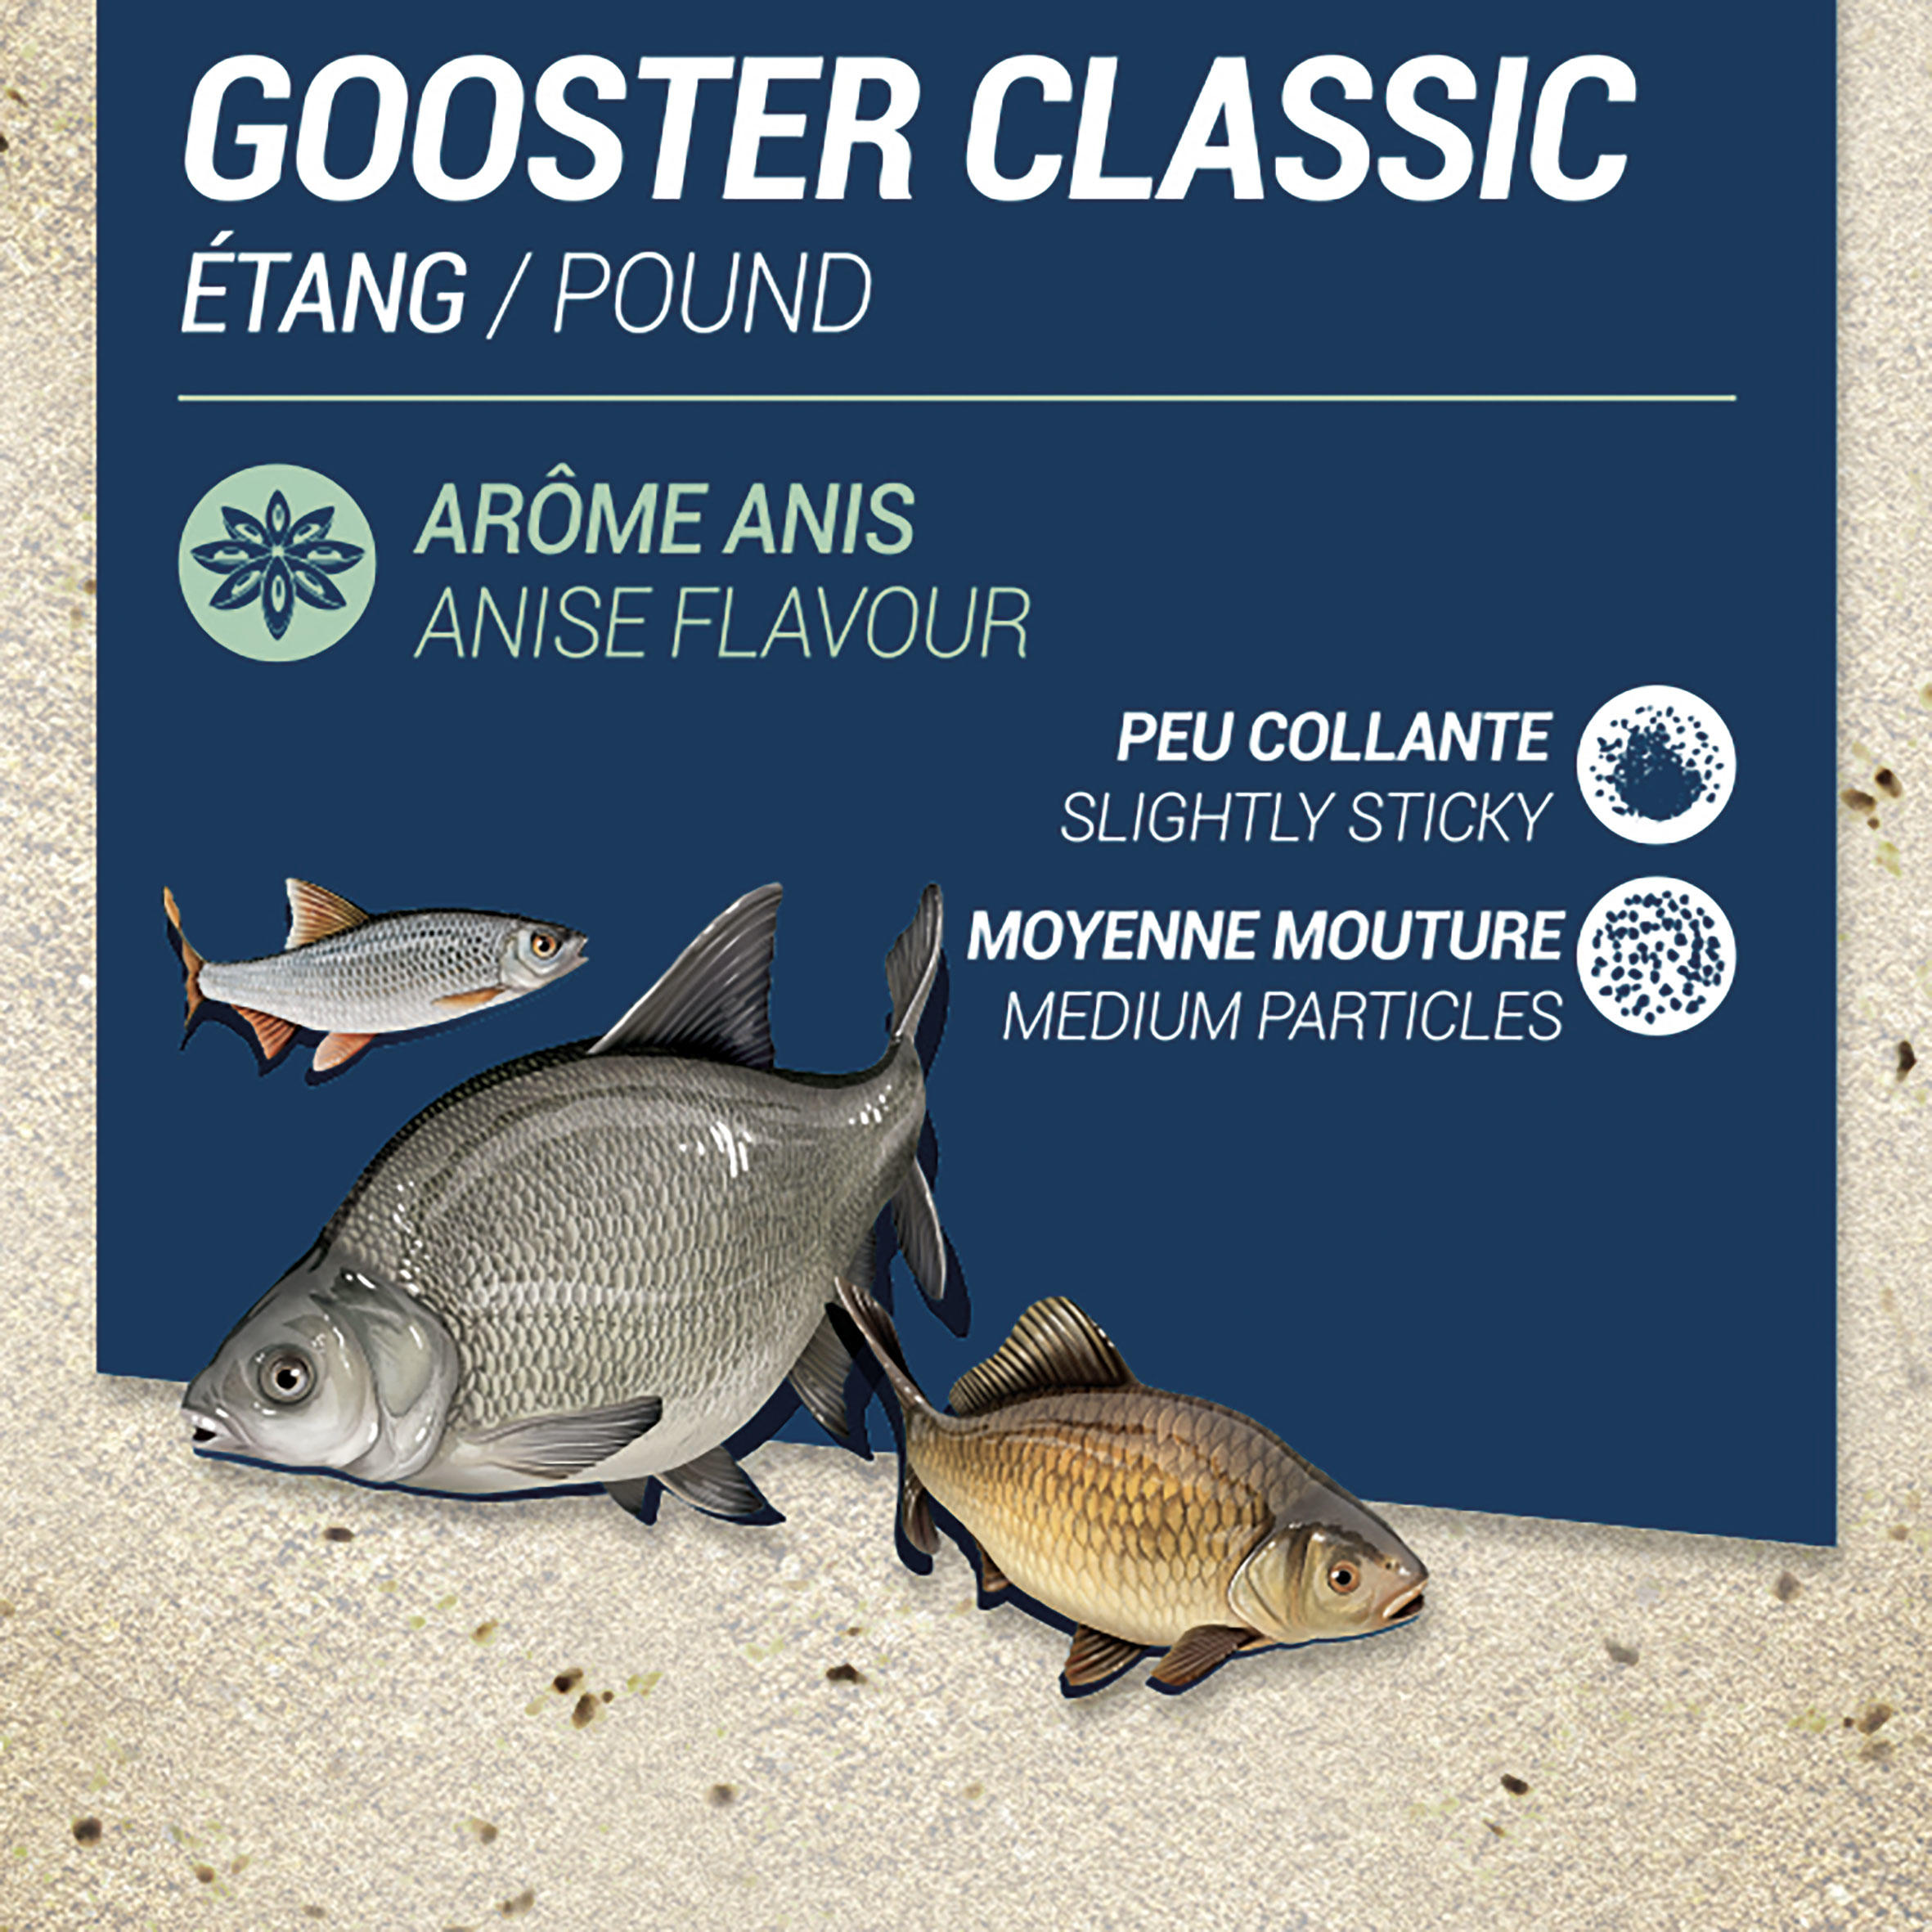 GOOSTER CLASSIC BAIT FOR ALL FISH ANISE 1kg 2/5